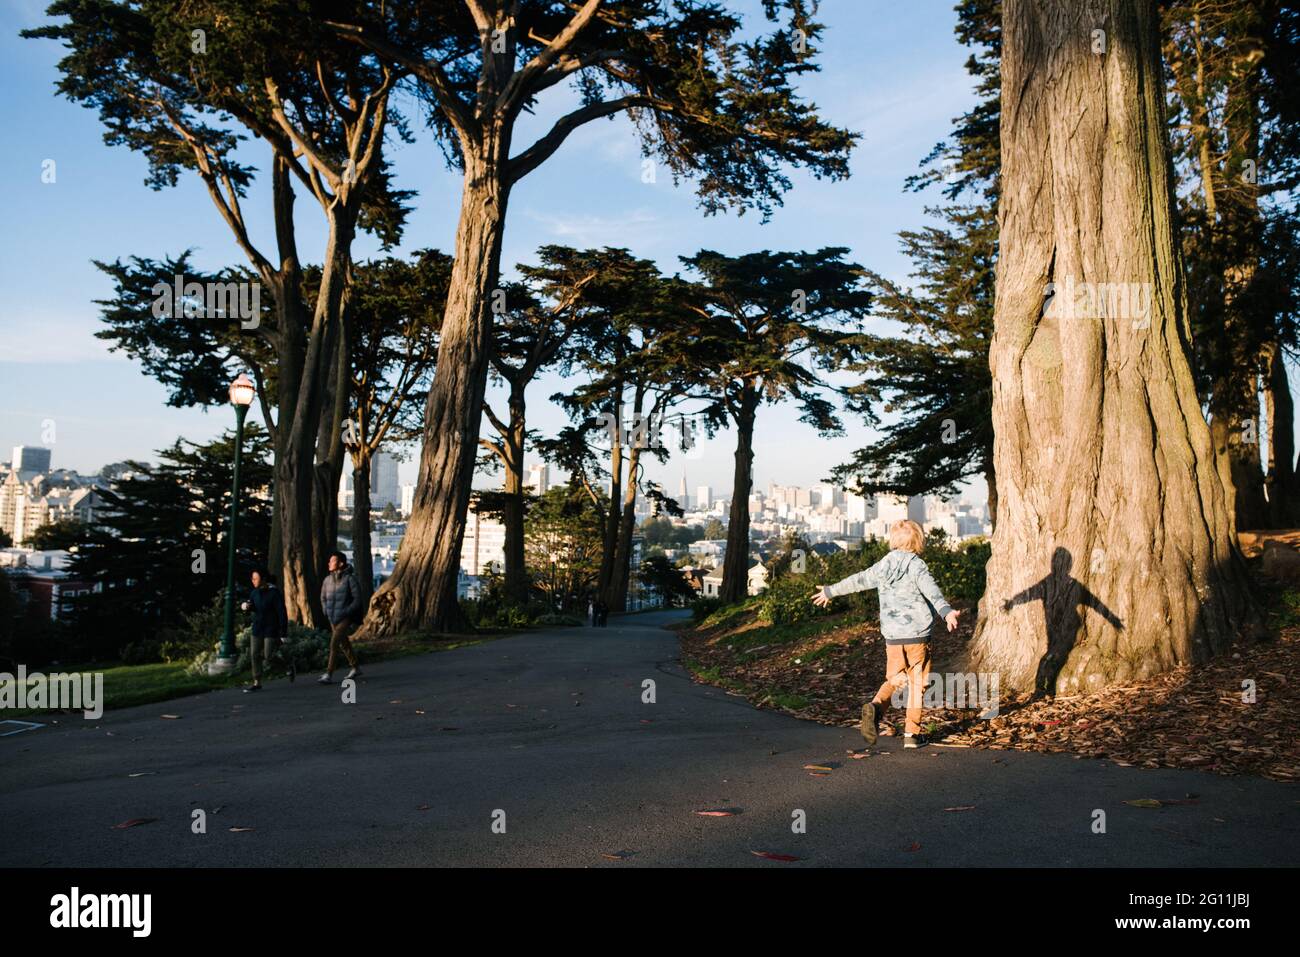 USA, California, San Francisco, Child with arms outstretched at tree trunk Stock Photo